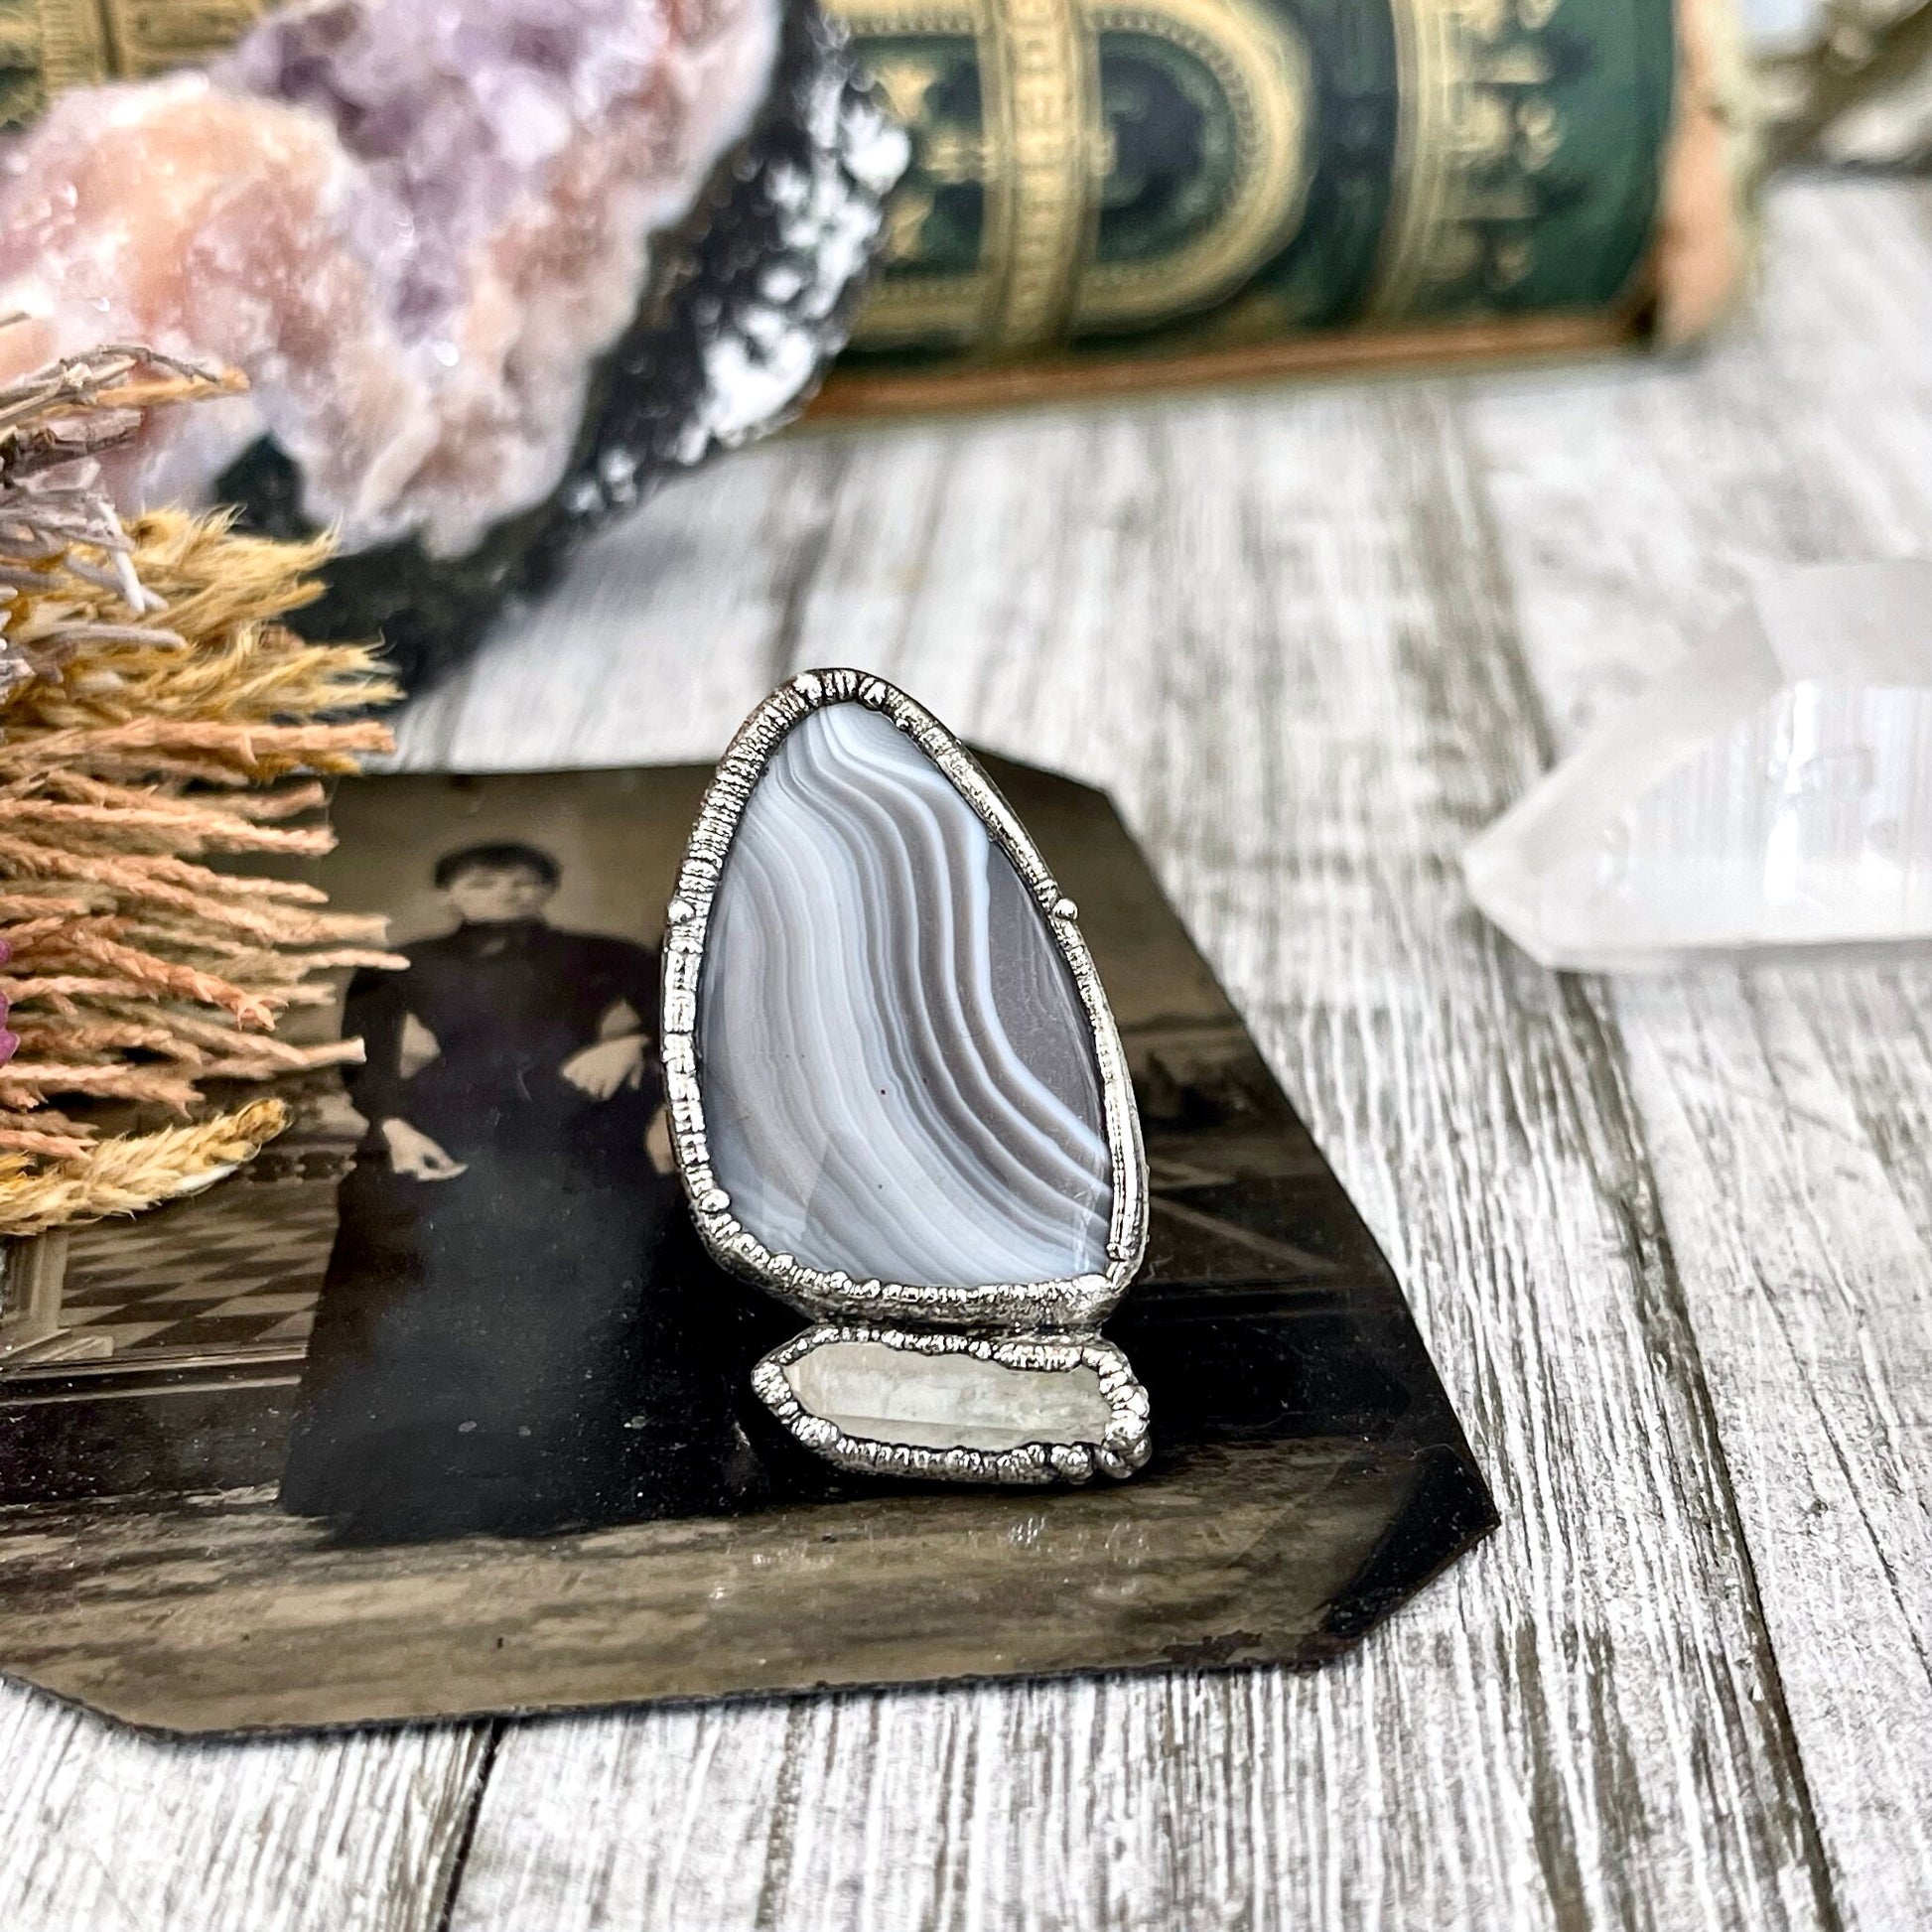 Size 7 Two Stone Ring- Banded Agate Clear Quartz Crystal Ring Fine Silver / Foxlark Collection - One of a Kind / Statement Jewelry Gemstone